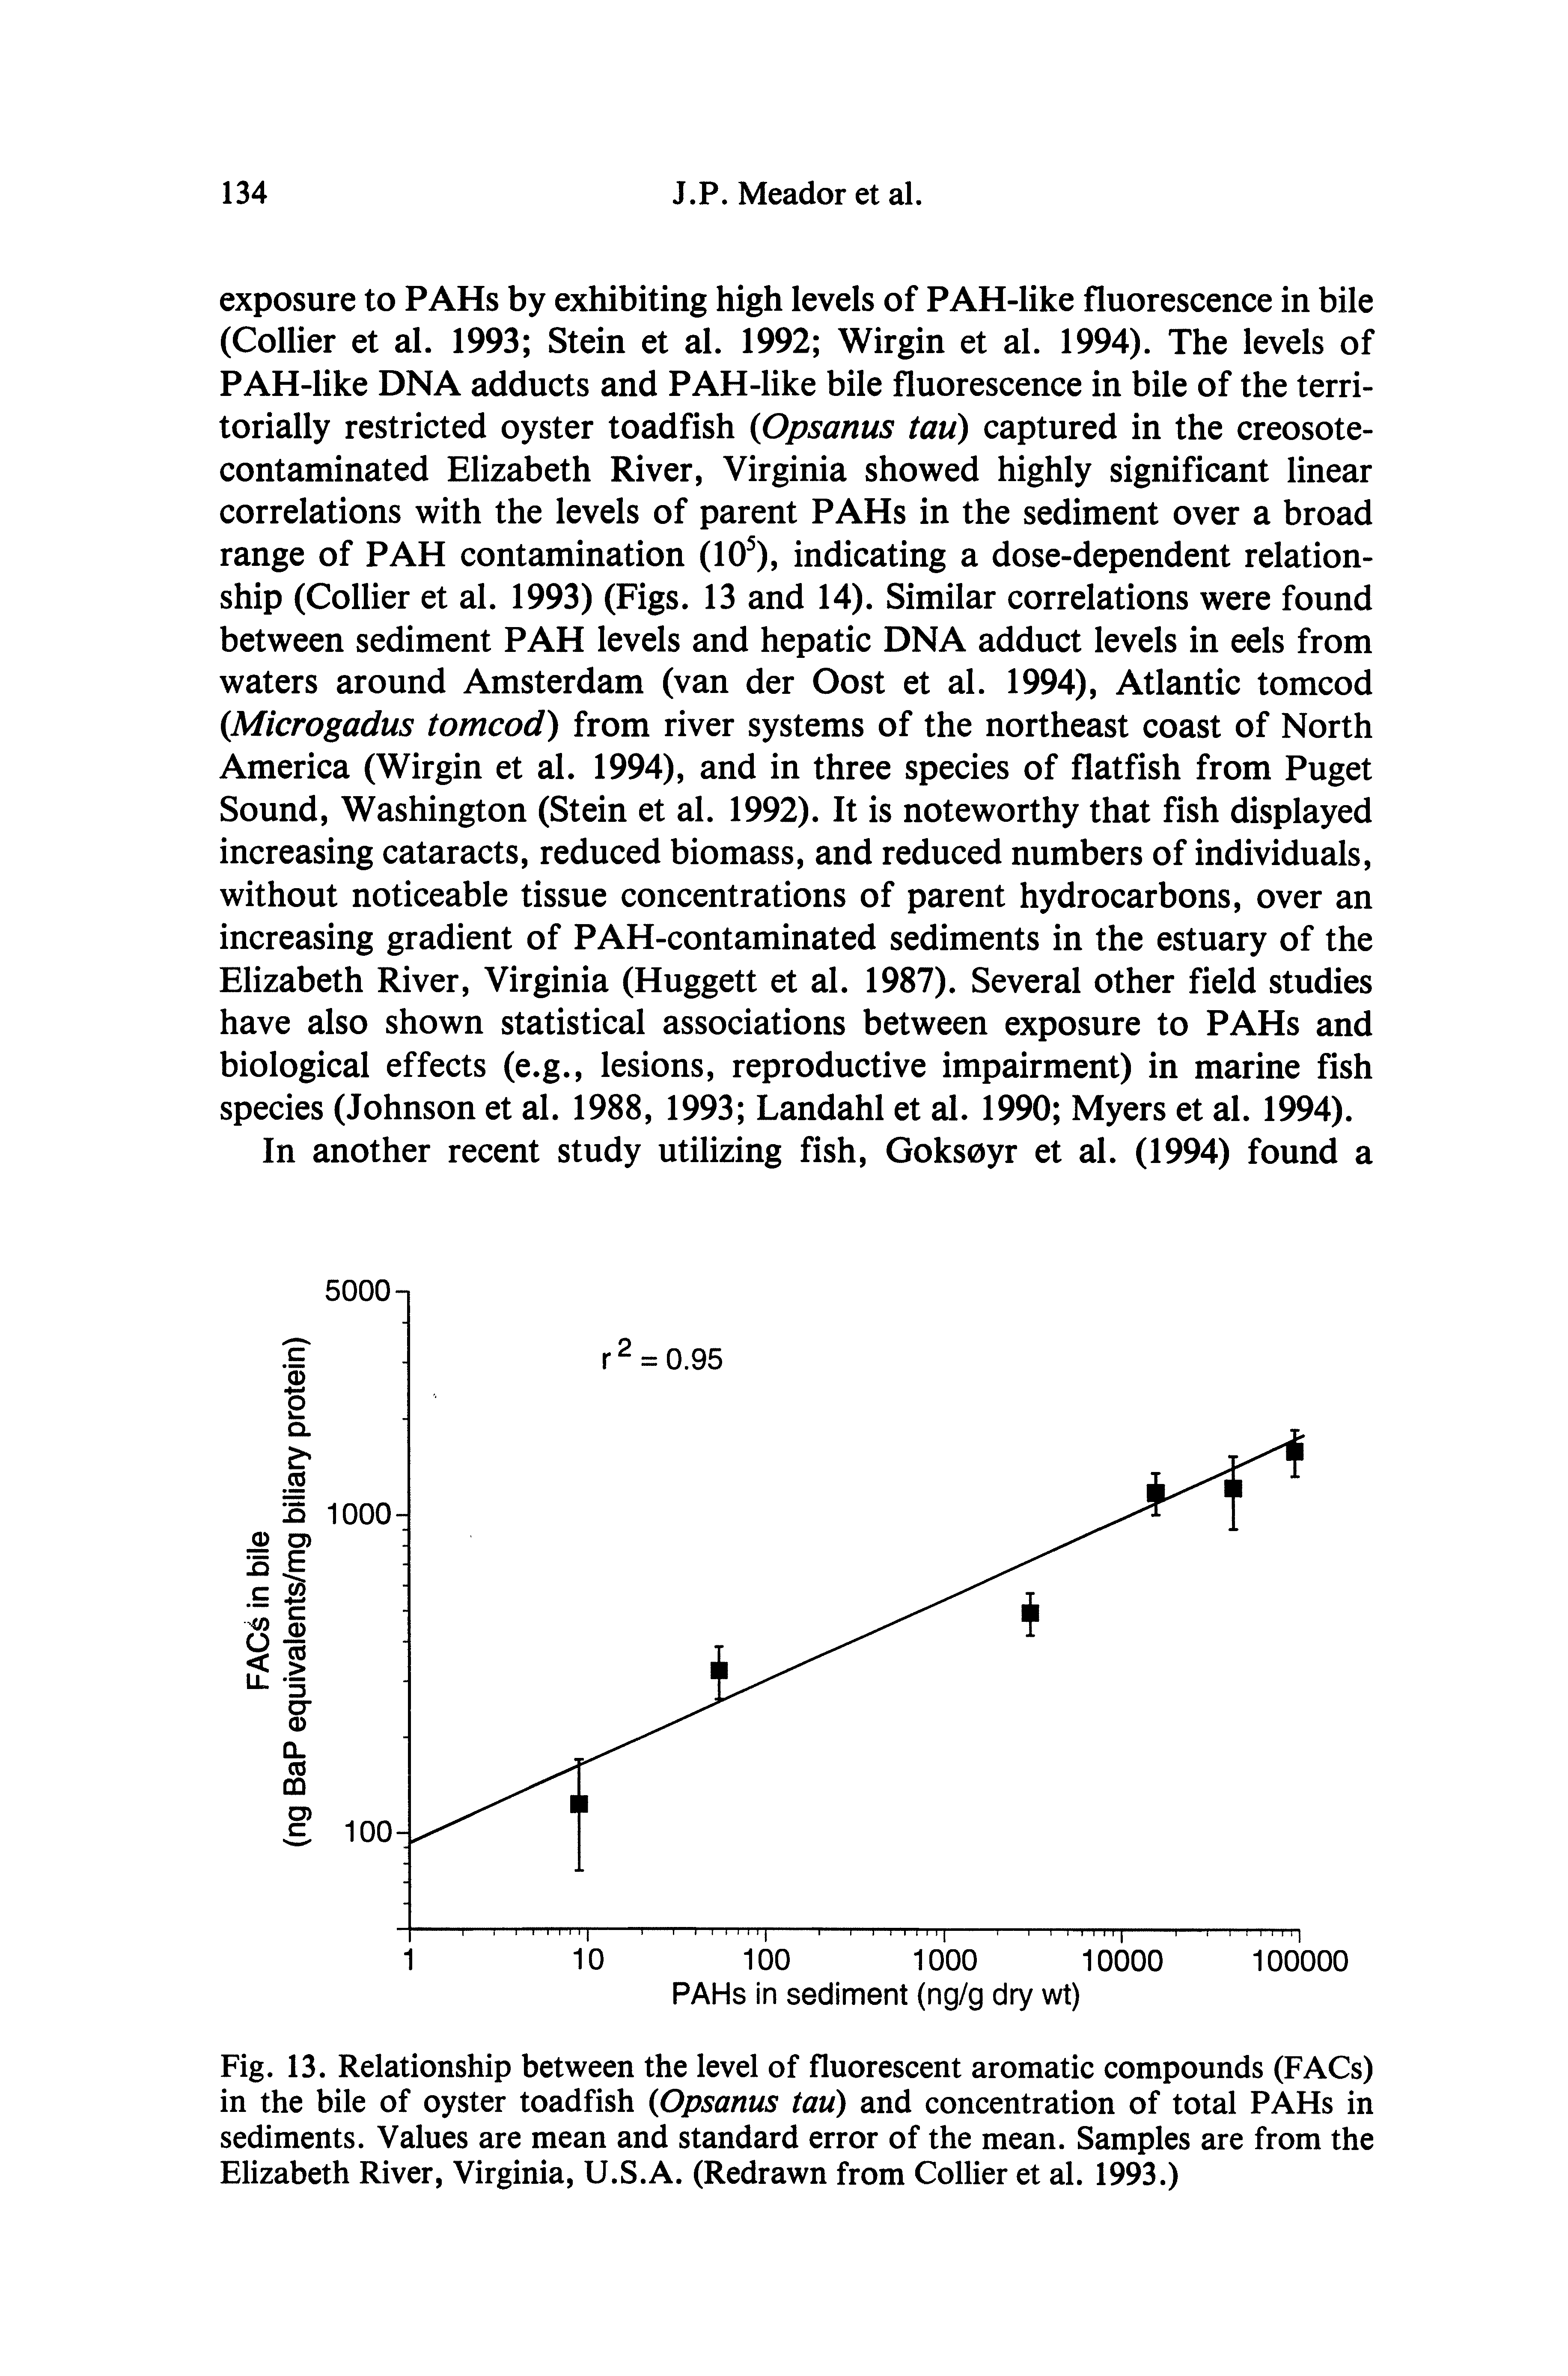 Fig. 13. Relationship between the level of fluorescent aromatic compounds (FACs) in the bile of oyster toadfish (Opsanus tau) and concentration of total PAHs in sediments. Values are mean and standard error of the mean. Samples are from the Elizabeth River, Virginia, U.S.A. (Redrawn from Collier et al. 1993.)...